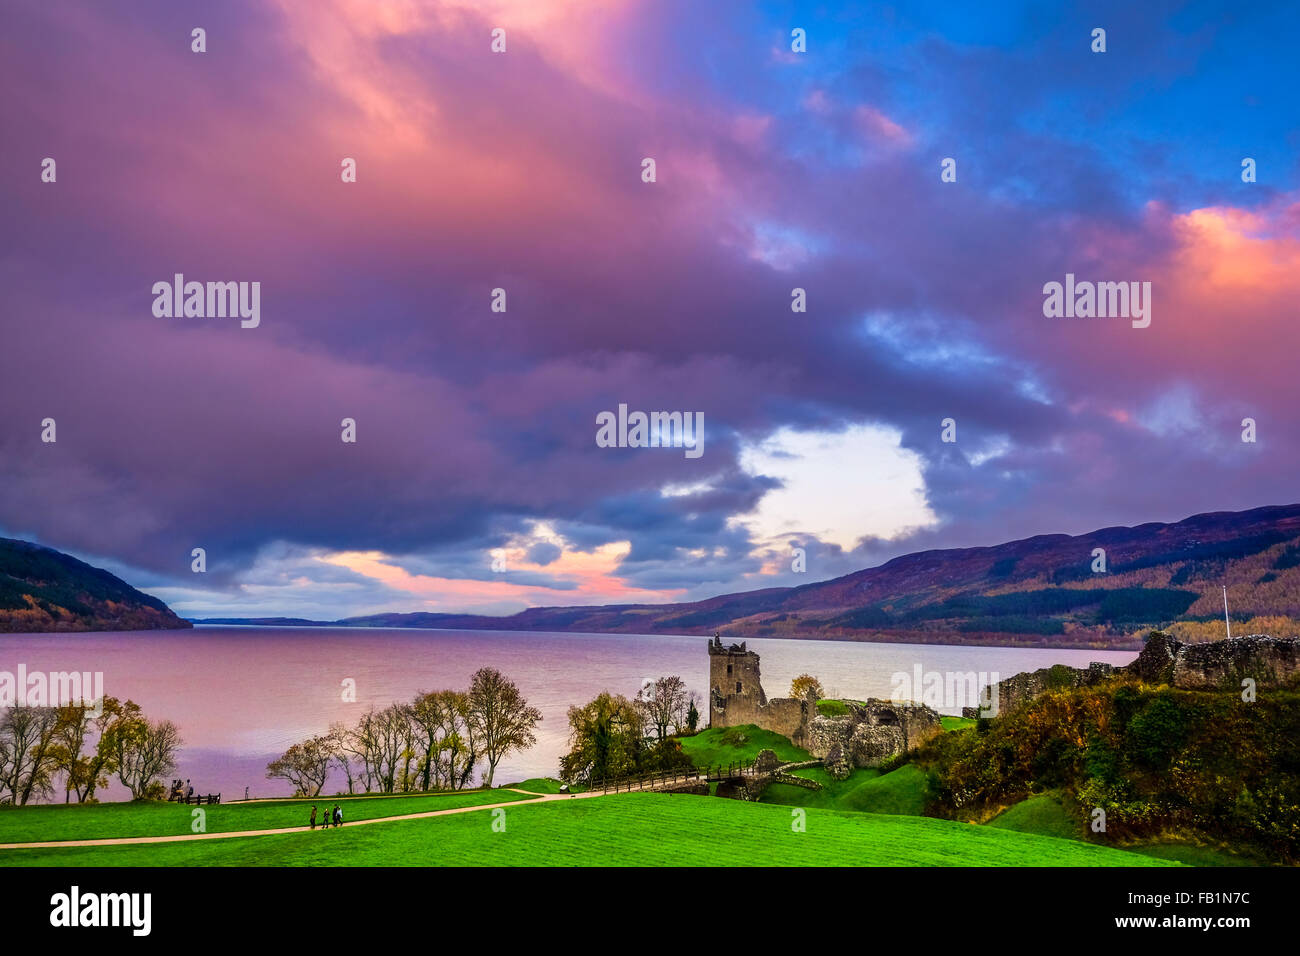 Urquhart Castle after a storm at sunset on Loch Ness, Scotland.  A lovely tourist destination and holiday or vacation location. Stock Photo